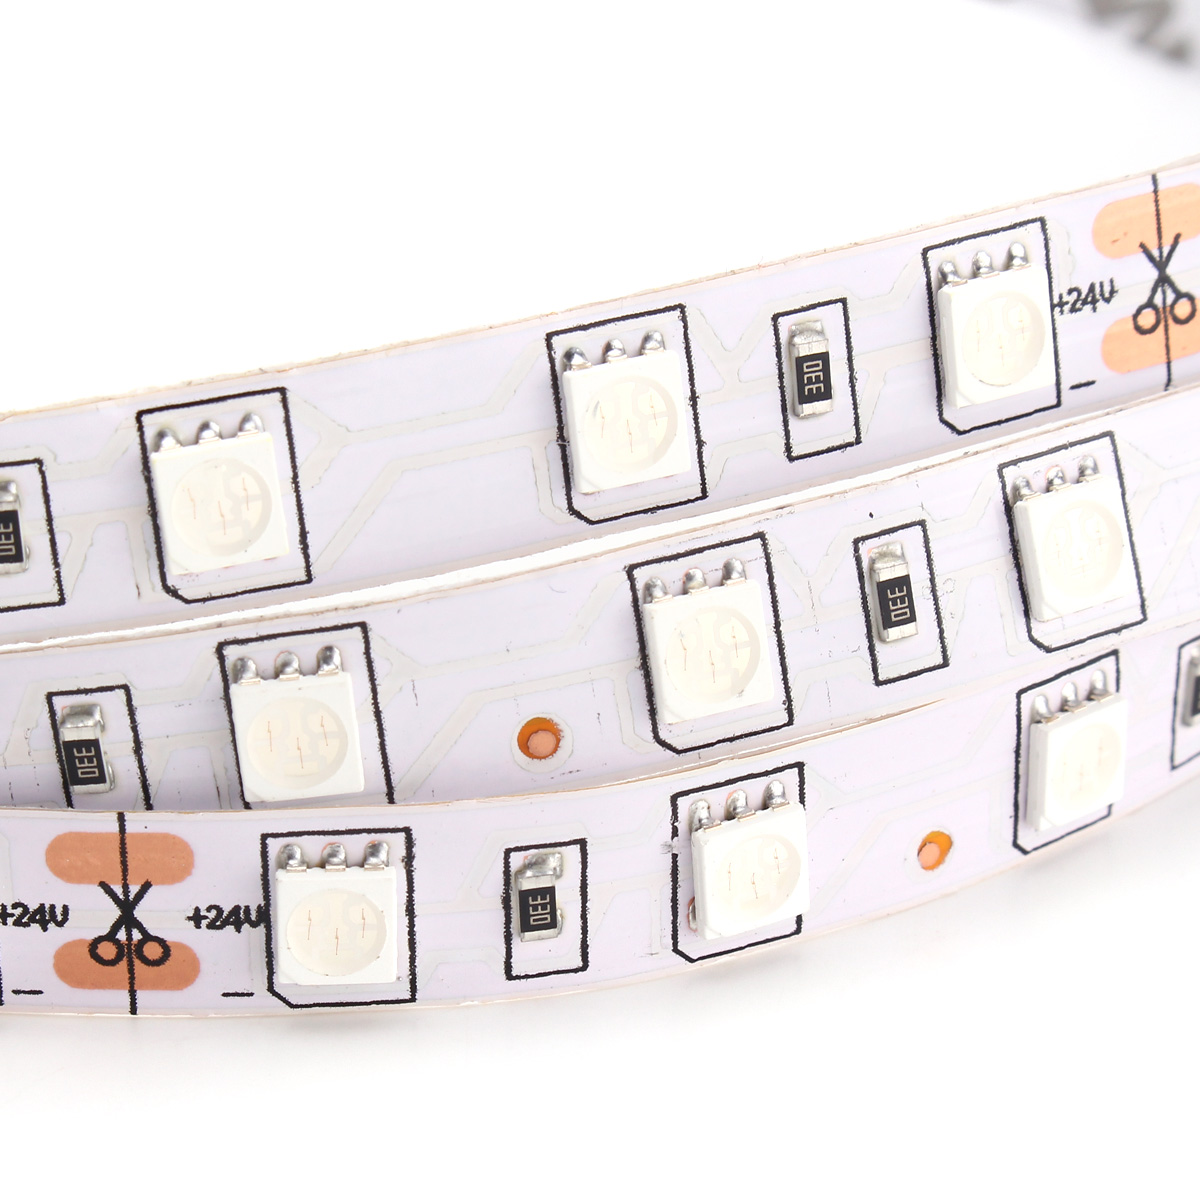 5M-72W-SMD5050-Non-Waterproof-300LEDs-Flexible-Strip-Tape-Light-for-Home-Decoration-DC24V-1178146-4